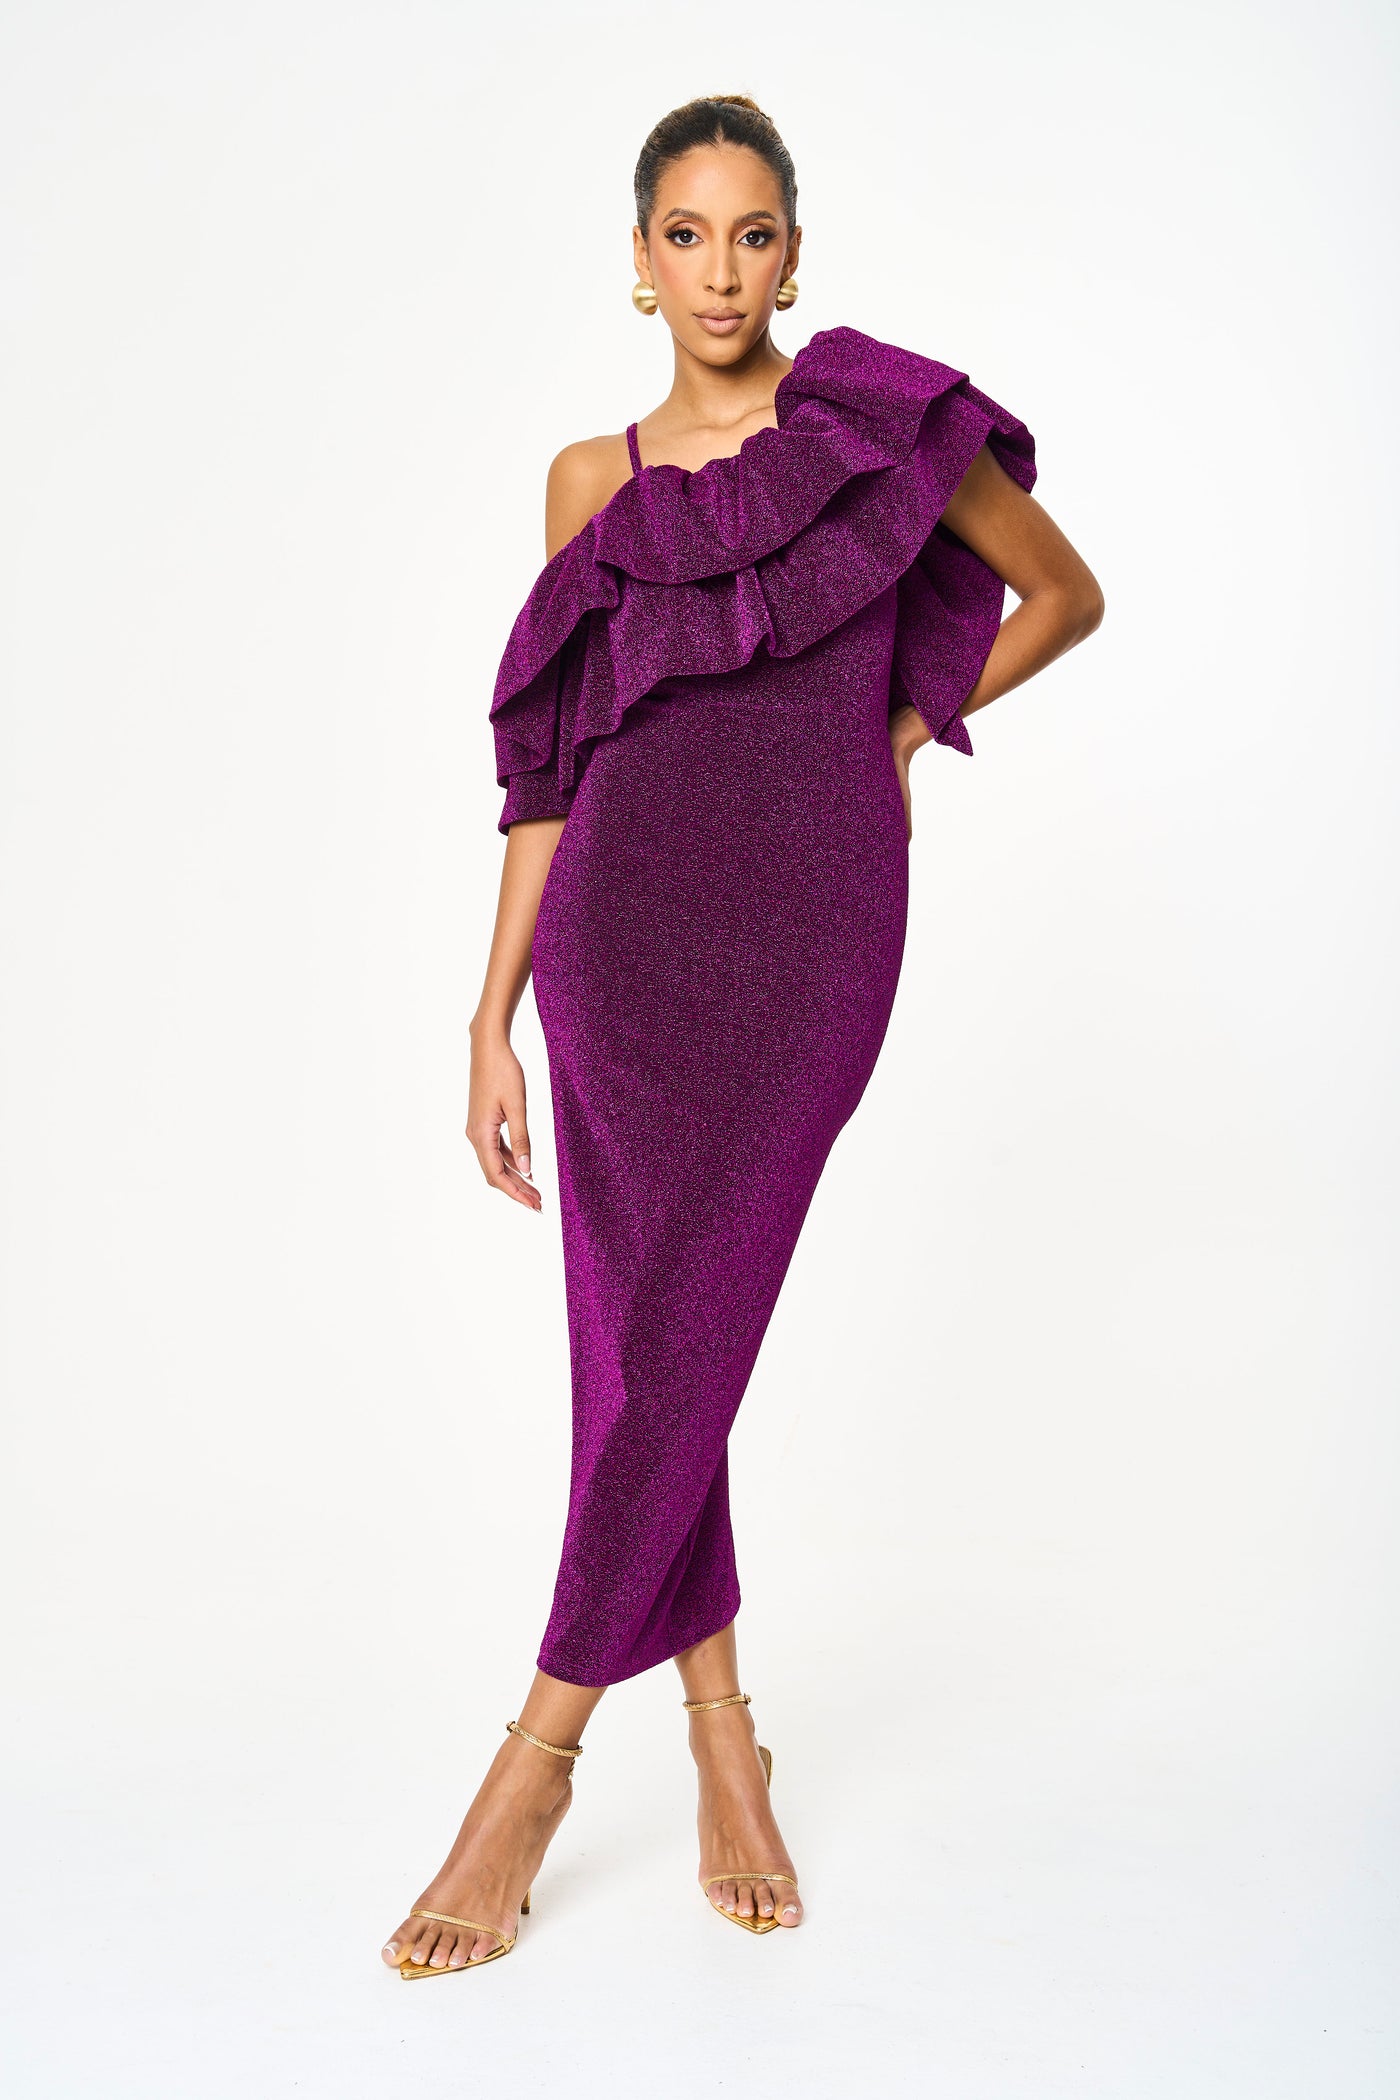 Remi Ruffled Off Shoulder Purple Fitted Dress